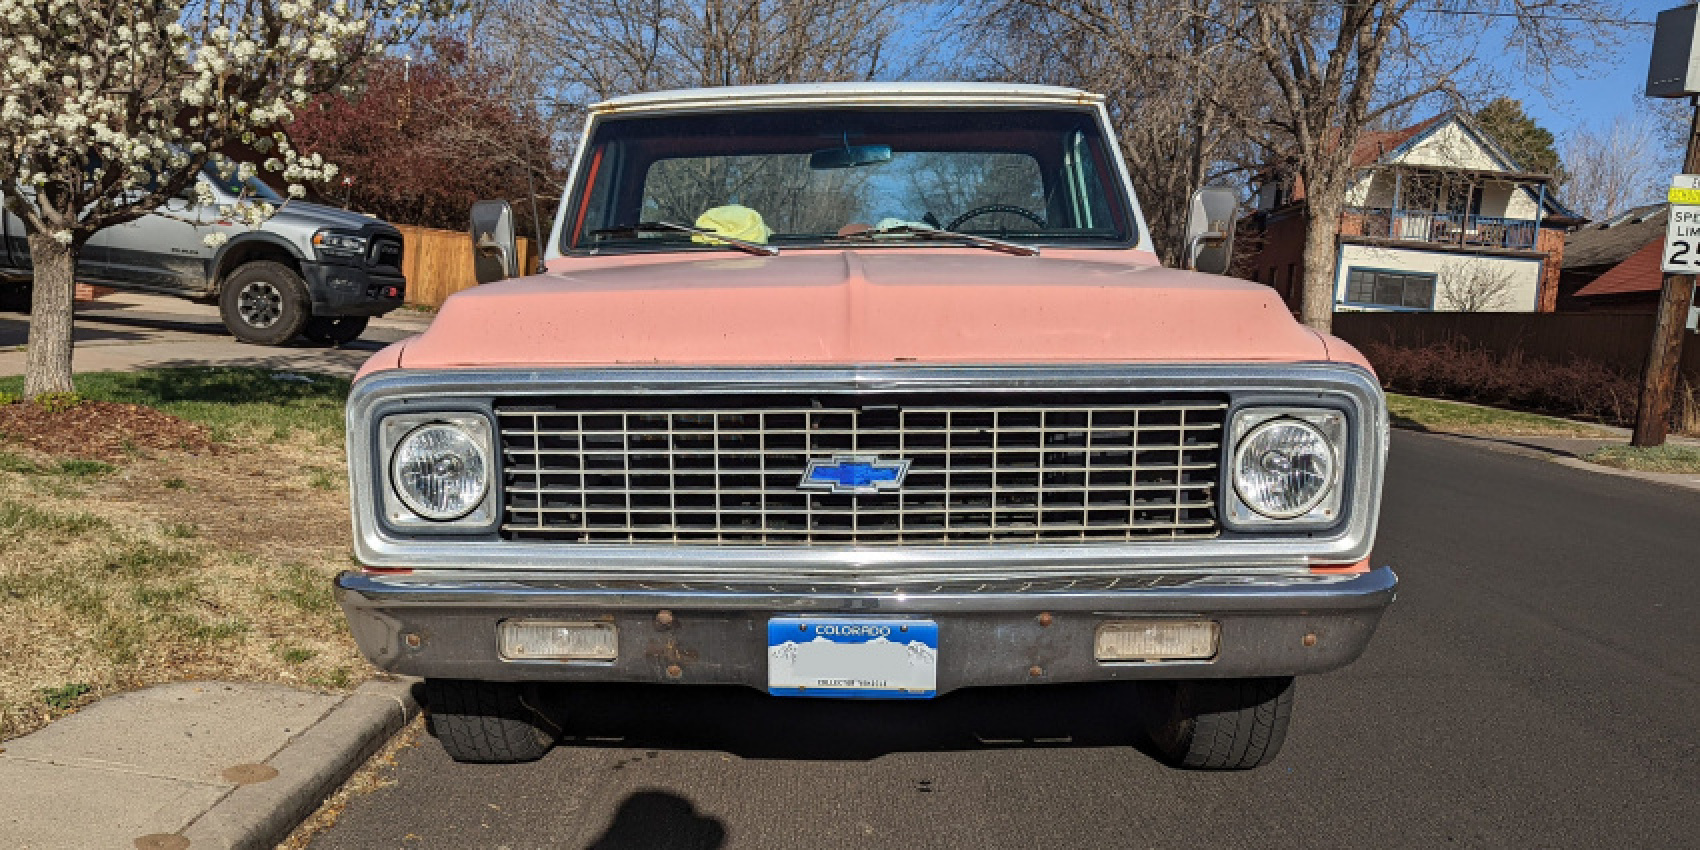 autos, car life, cars, chevrolet, classic cars, 1971 chevrolet c10 cheyenne super is down on the denver street